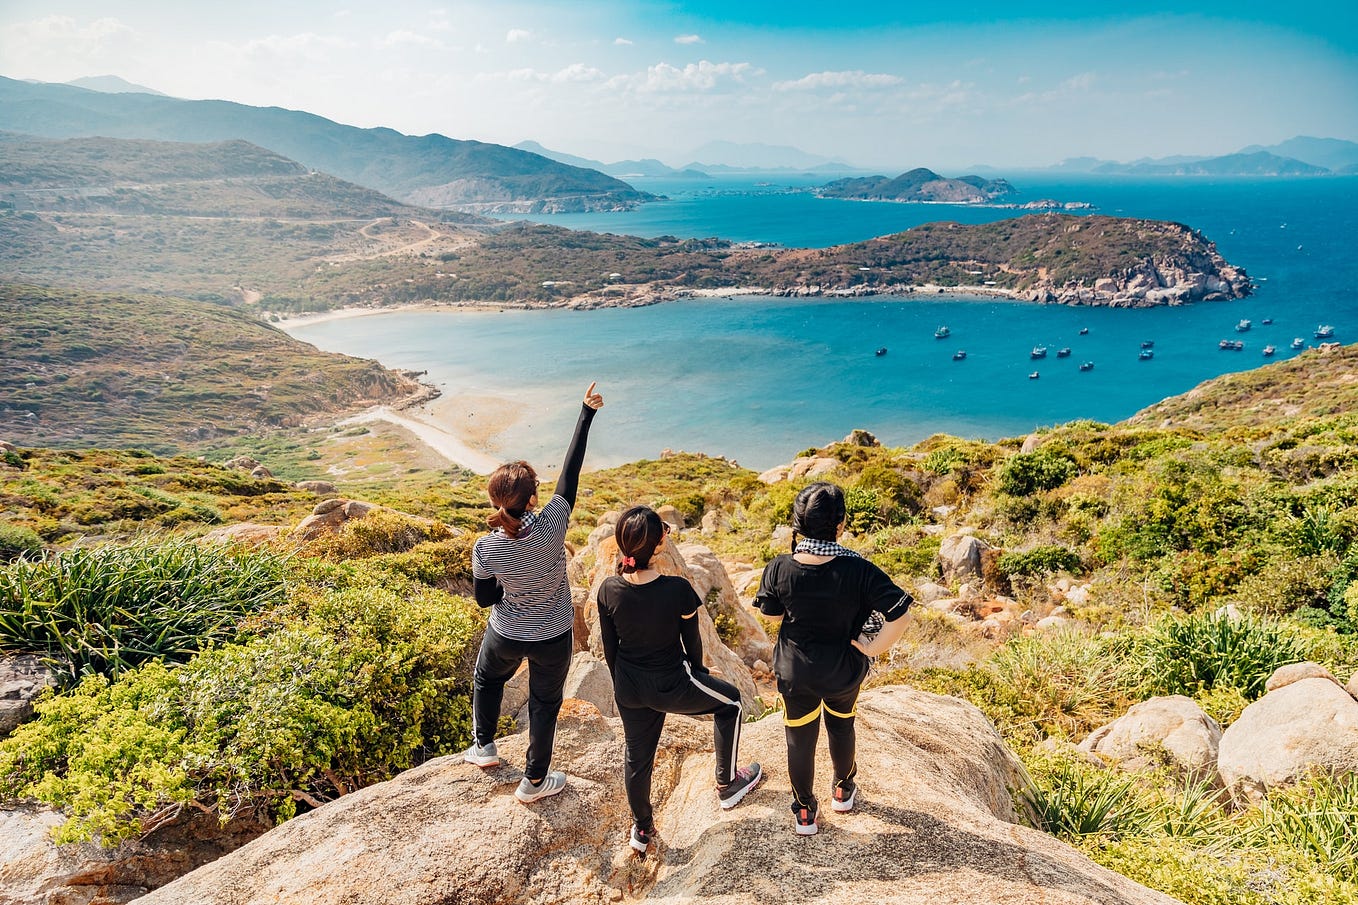 Three women on a rocky hilltop looking out over a sunlit ocean bay